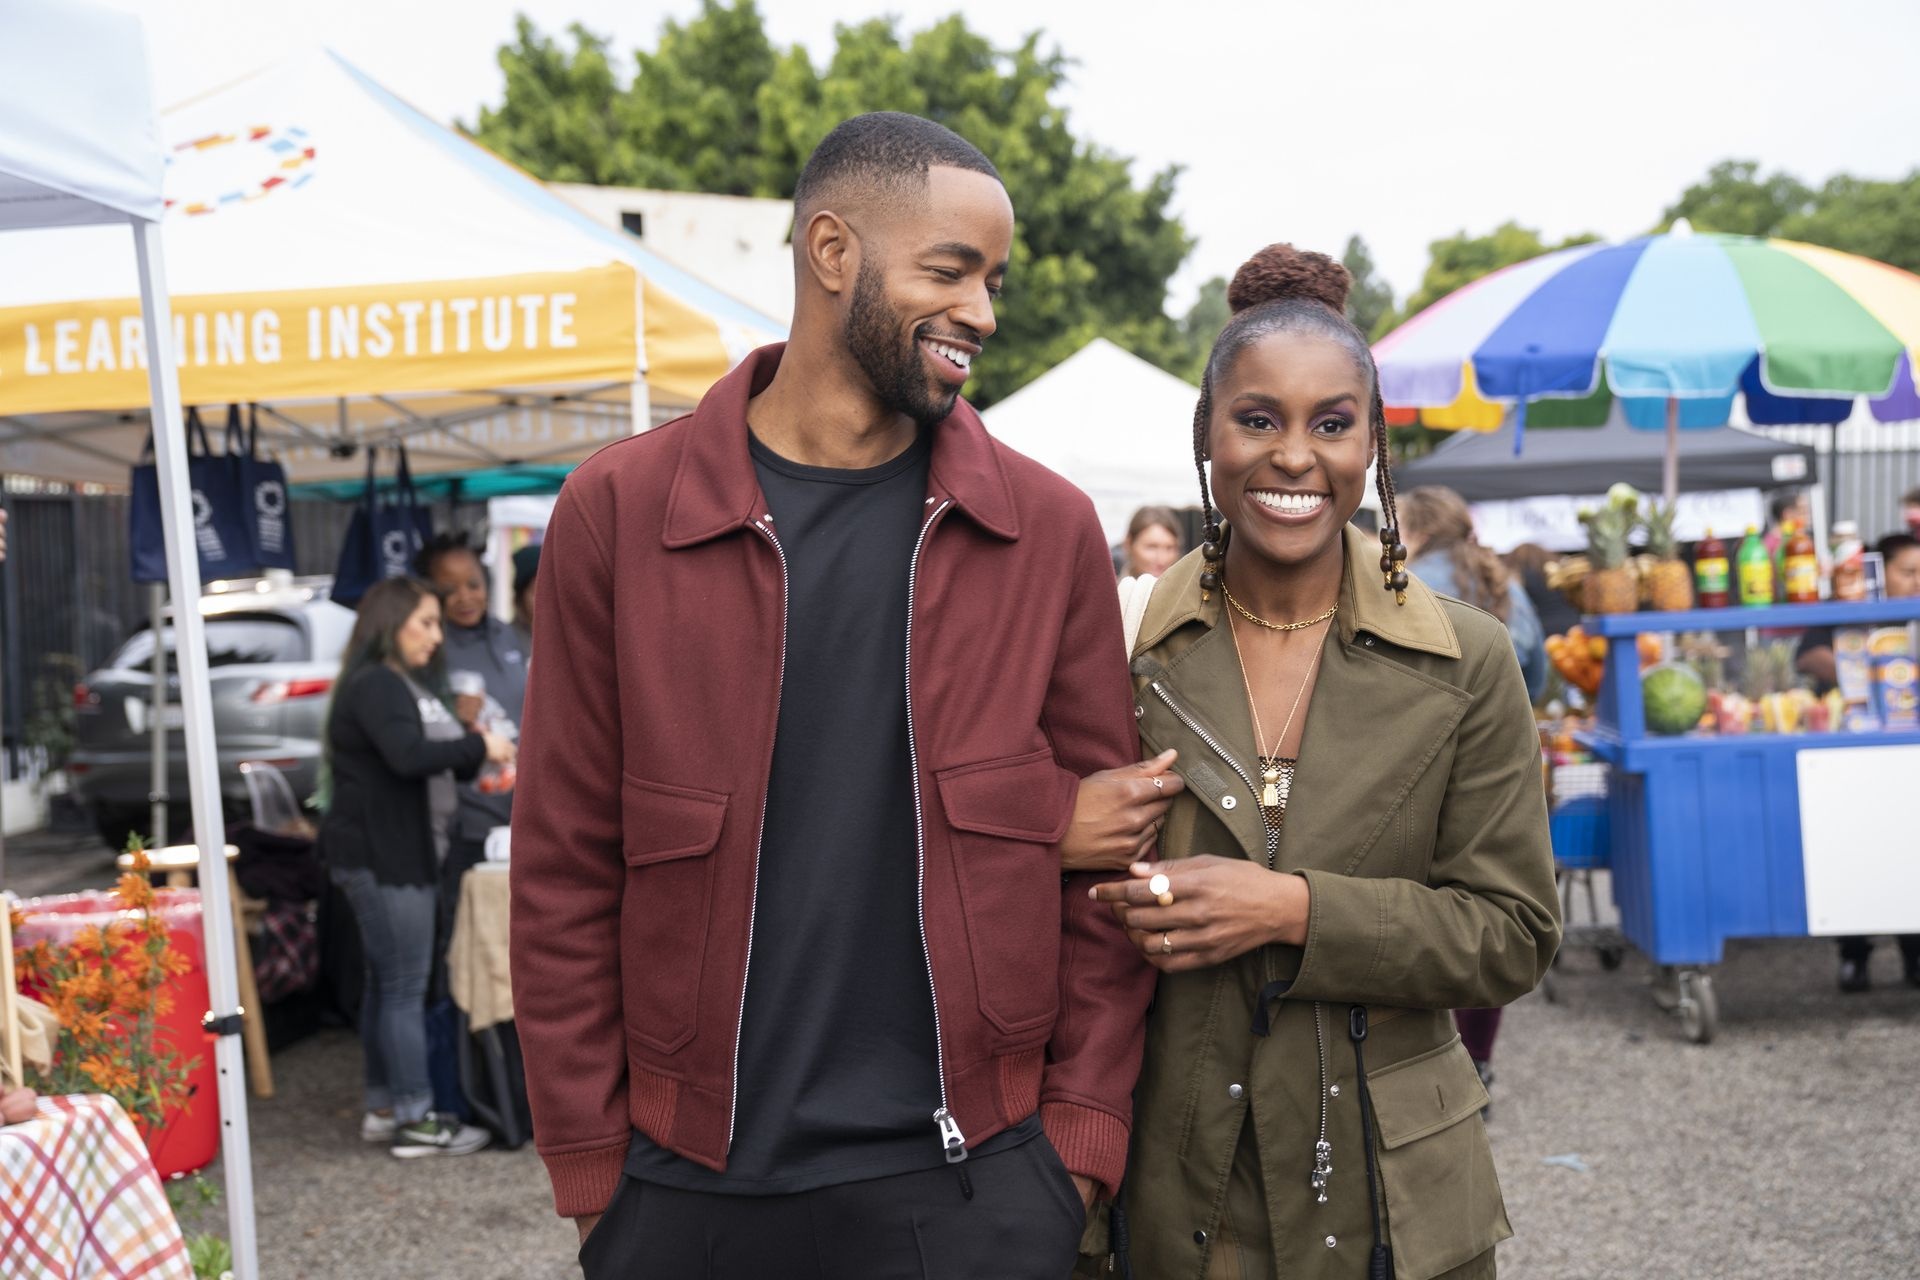 Insecure season 5, News and updates, Release date speculations, Casting rumors, 1920x1280 HD Desktop